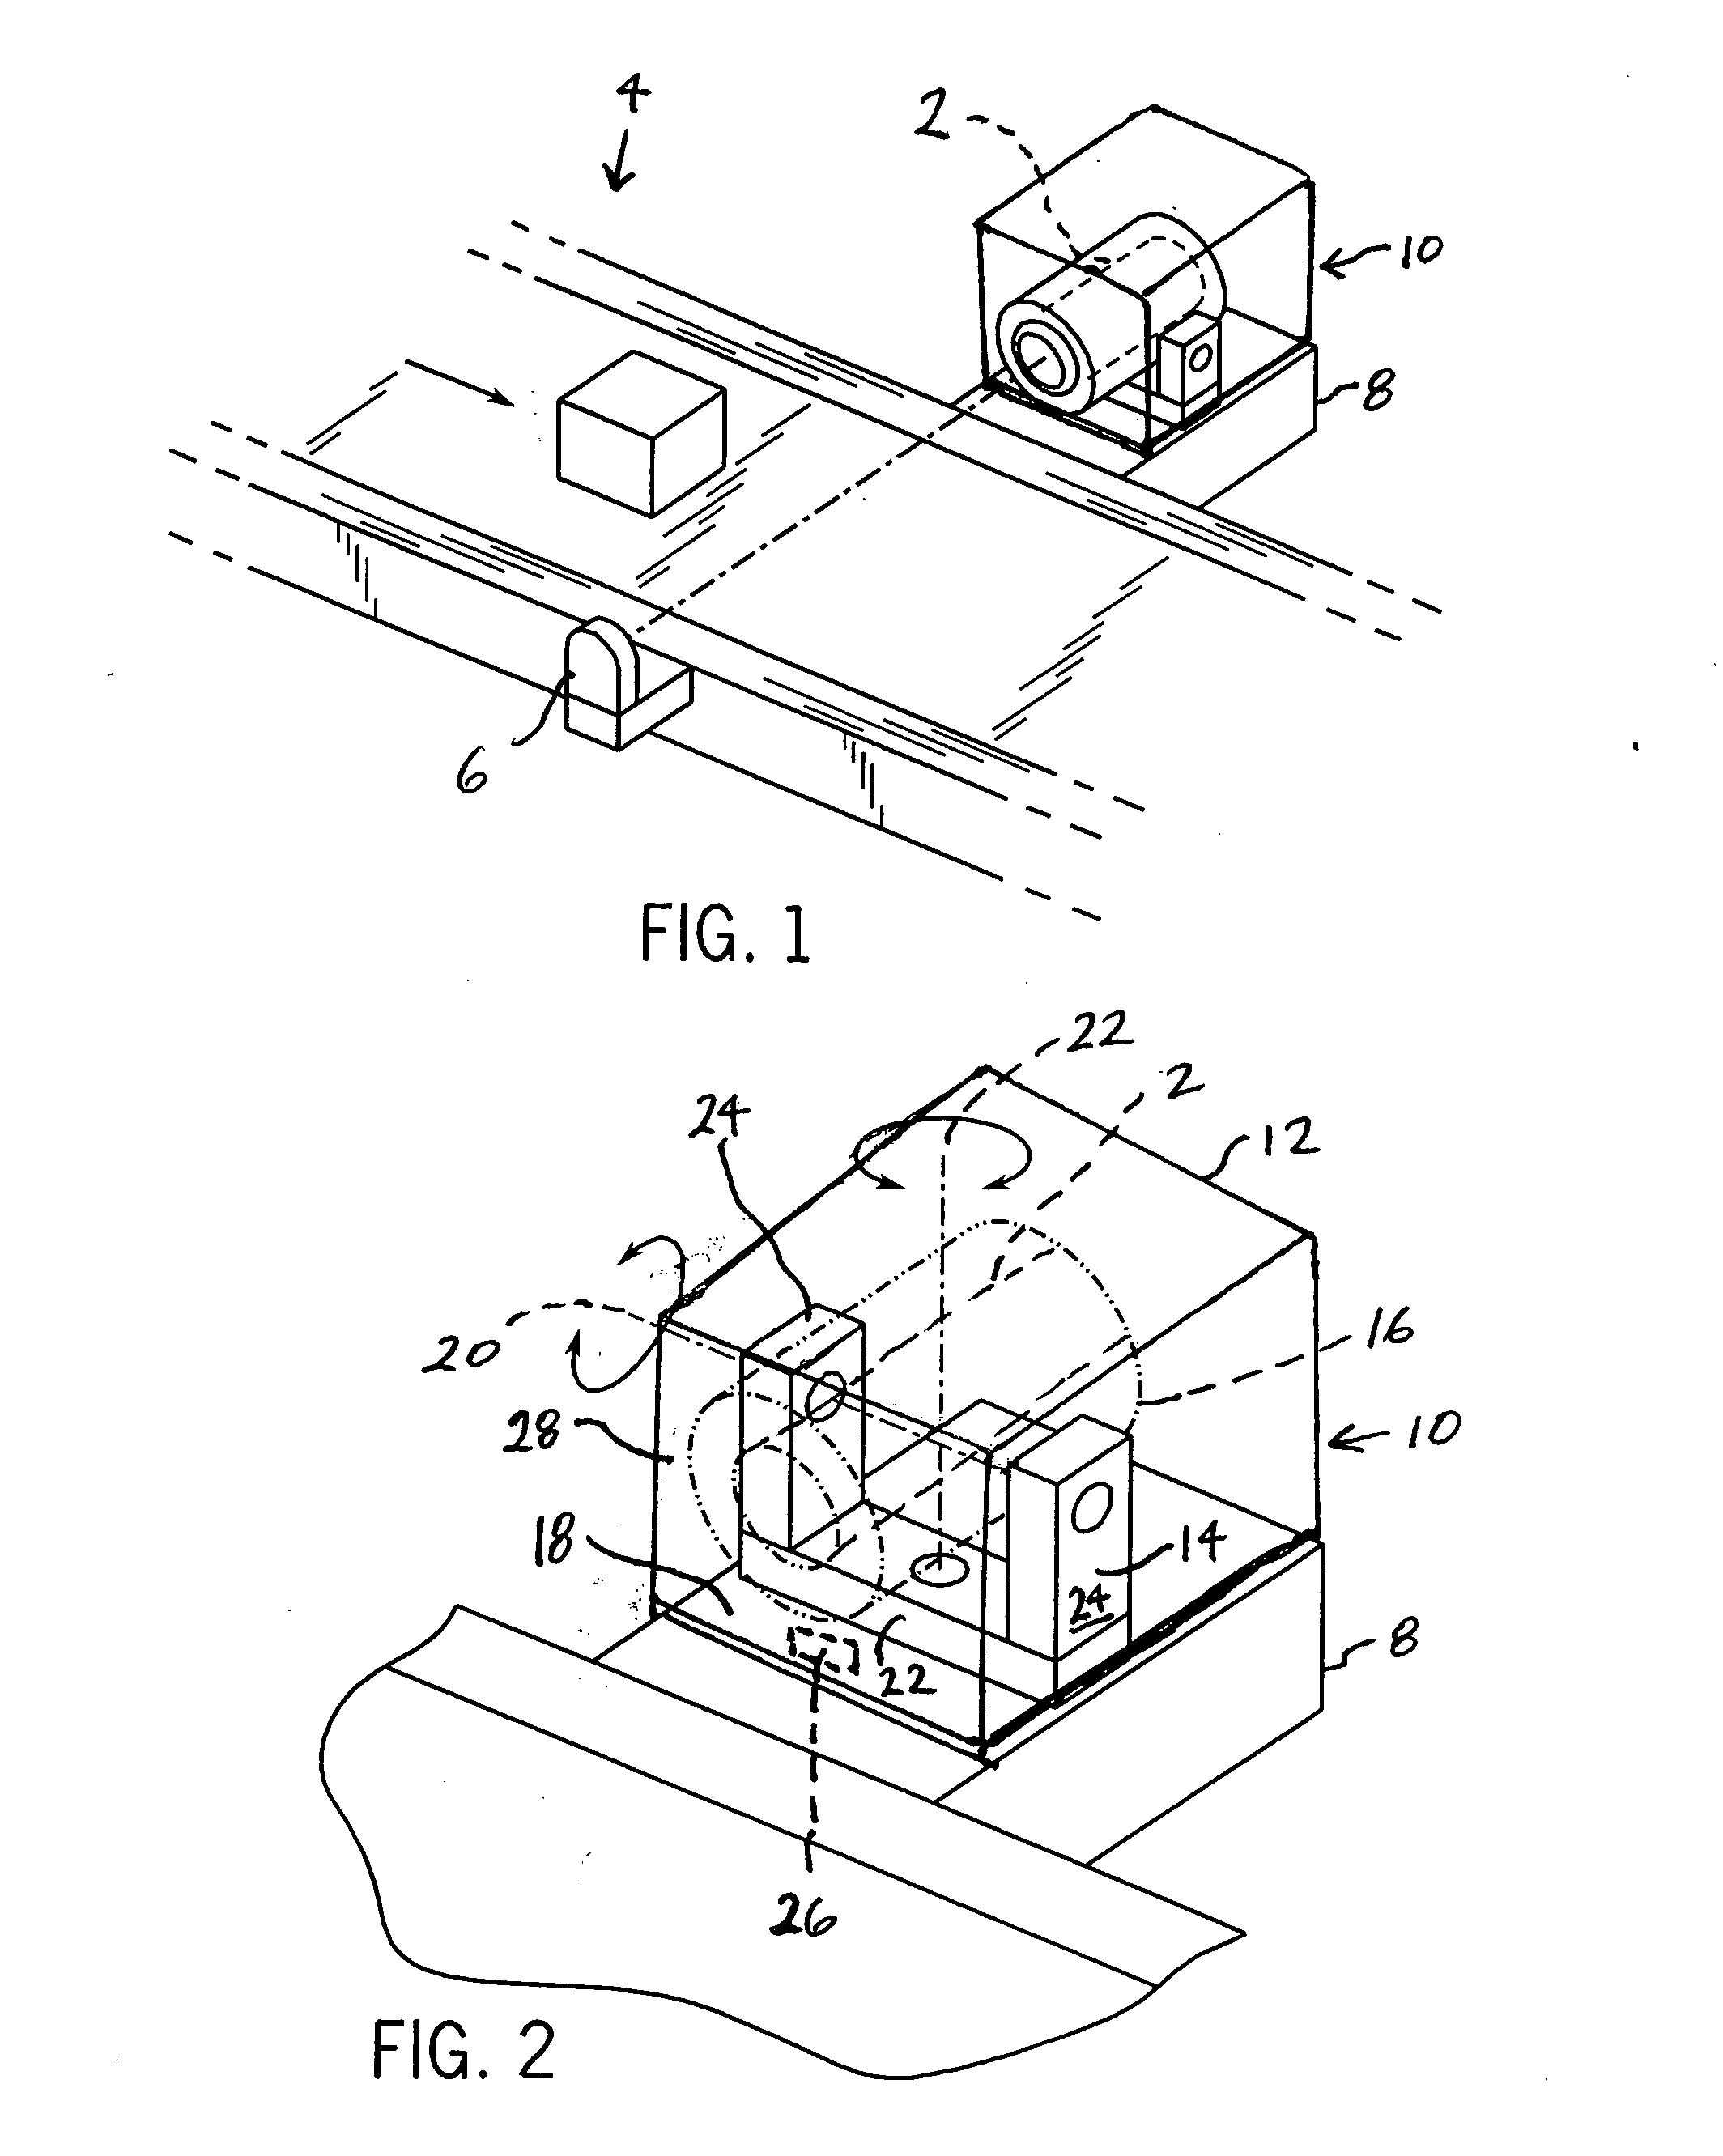 Sensor mounting structure allowing for adjustment of sensor position